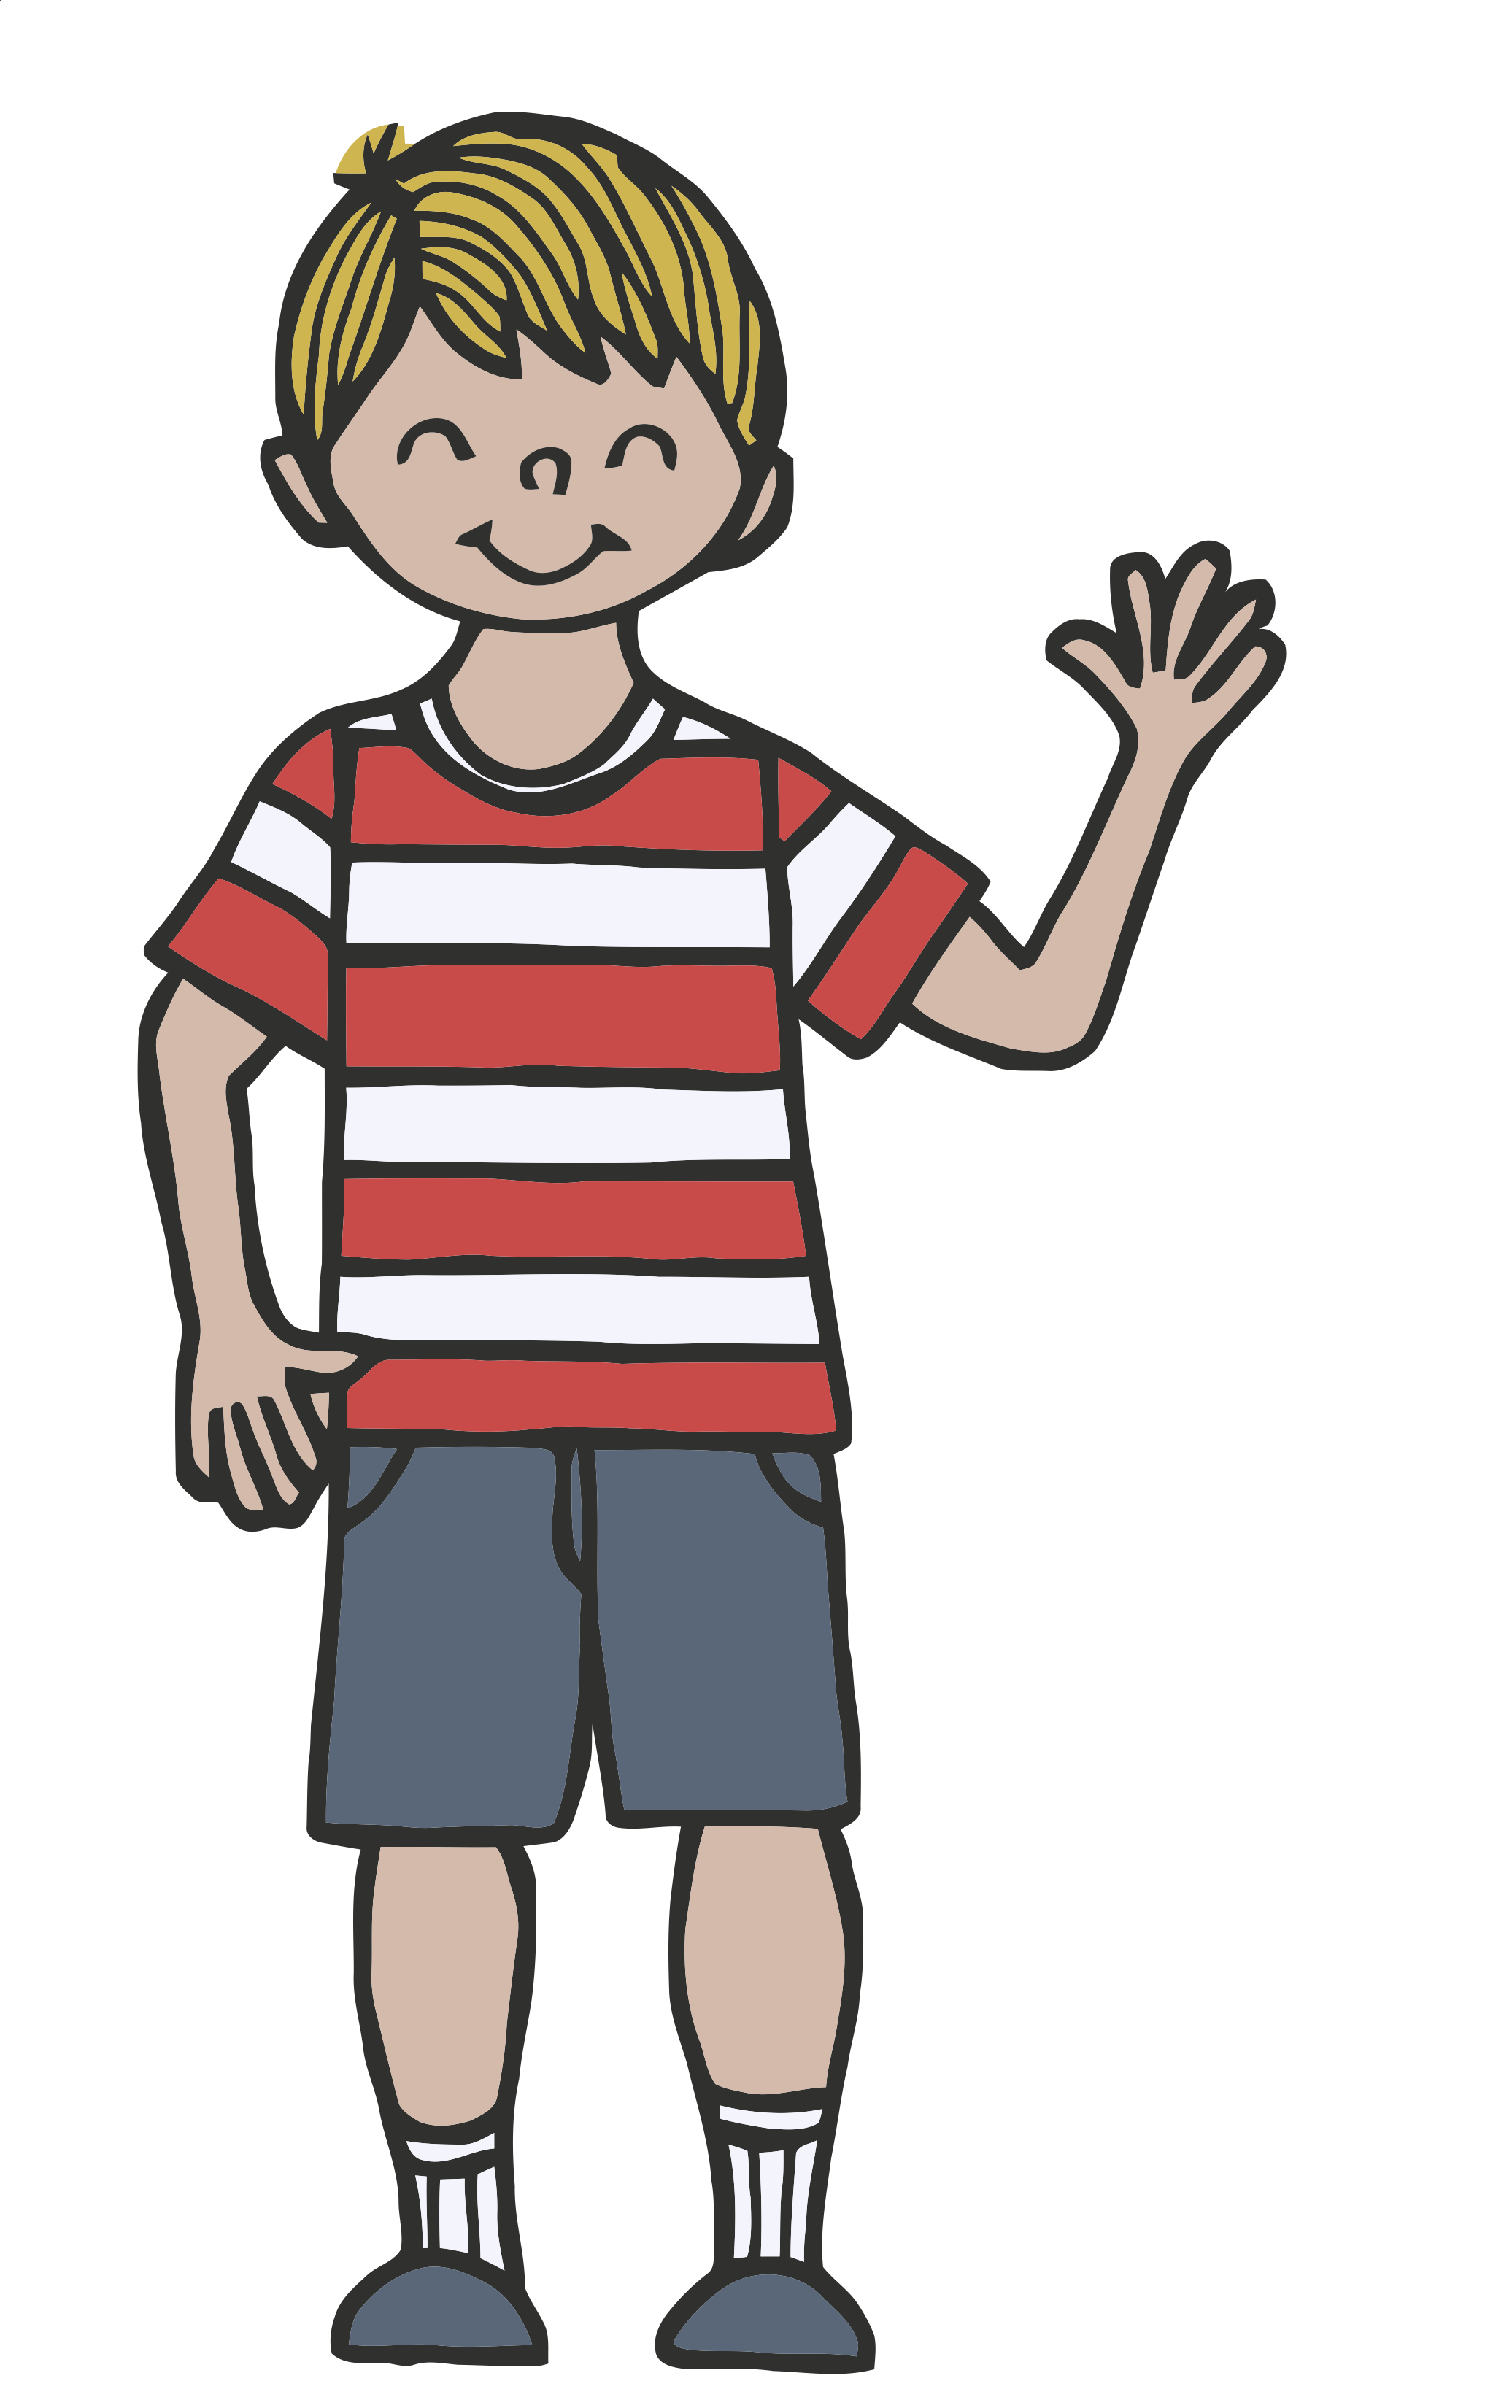 Family Waving Goodbye Clipart - ClipArt Best